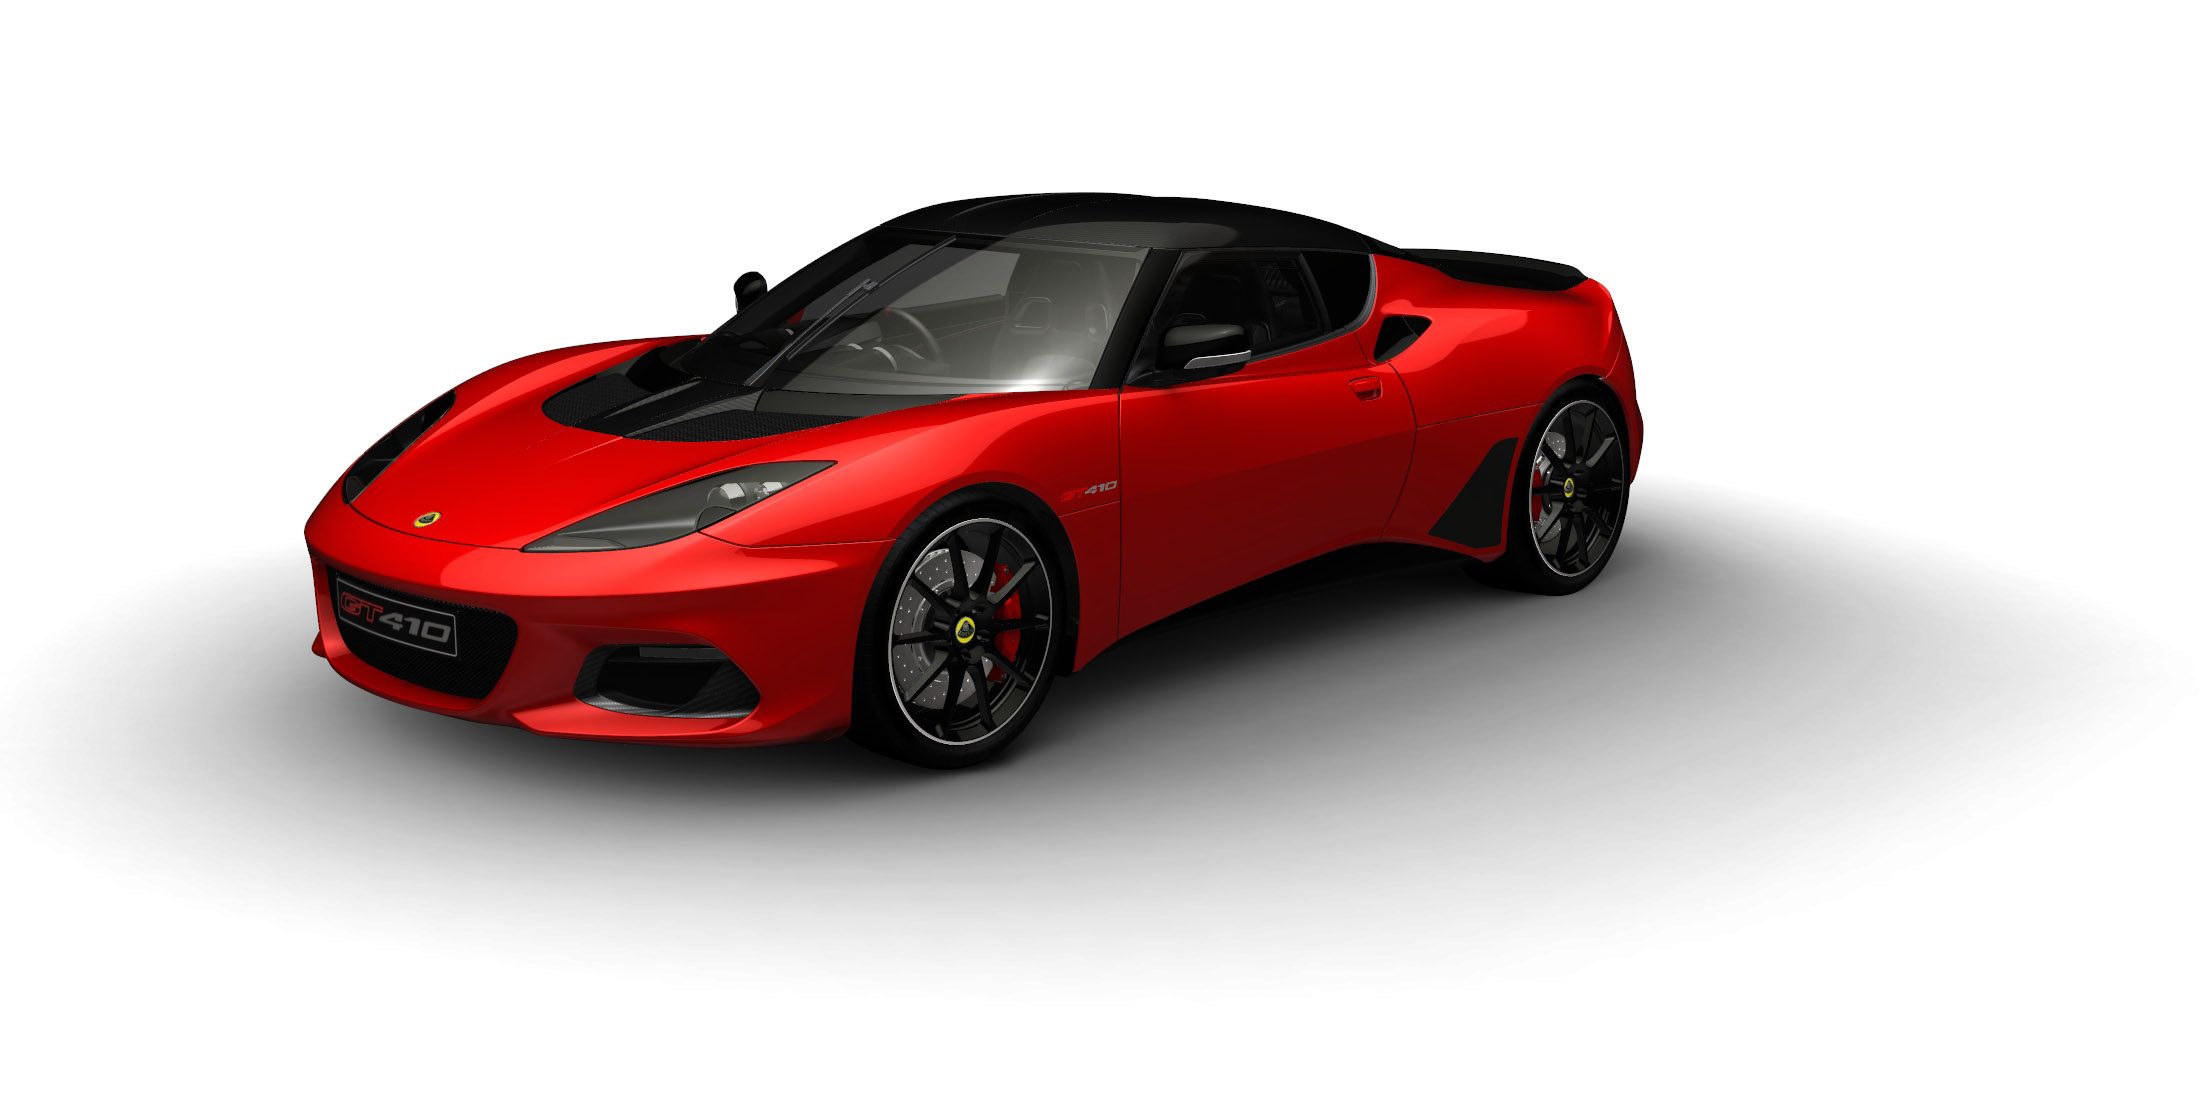 The Evora Gt410 Sport Lotus Cars For The Drivers